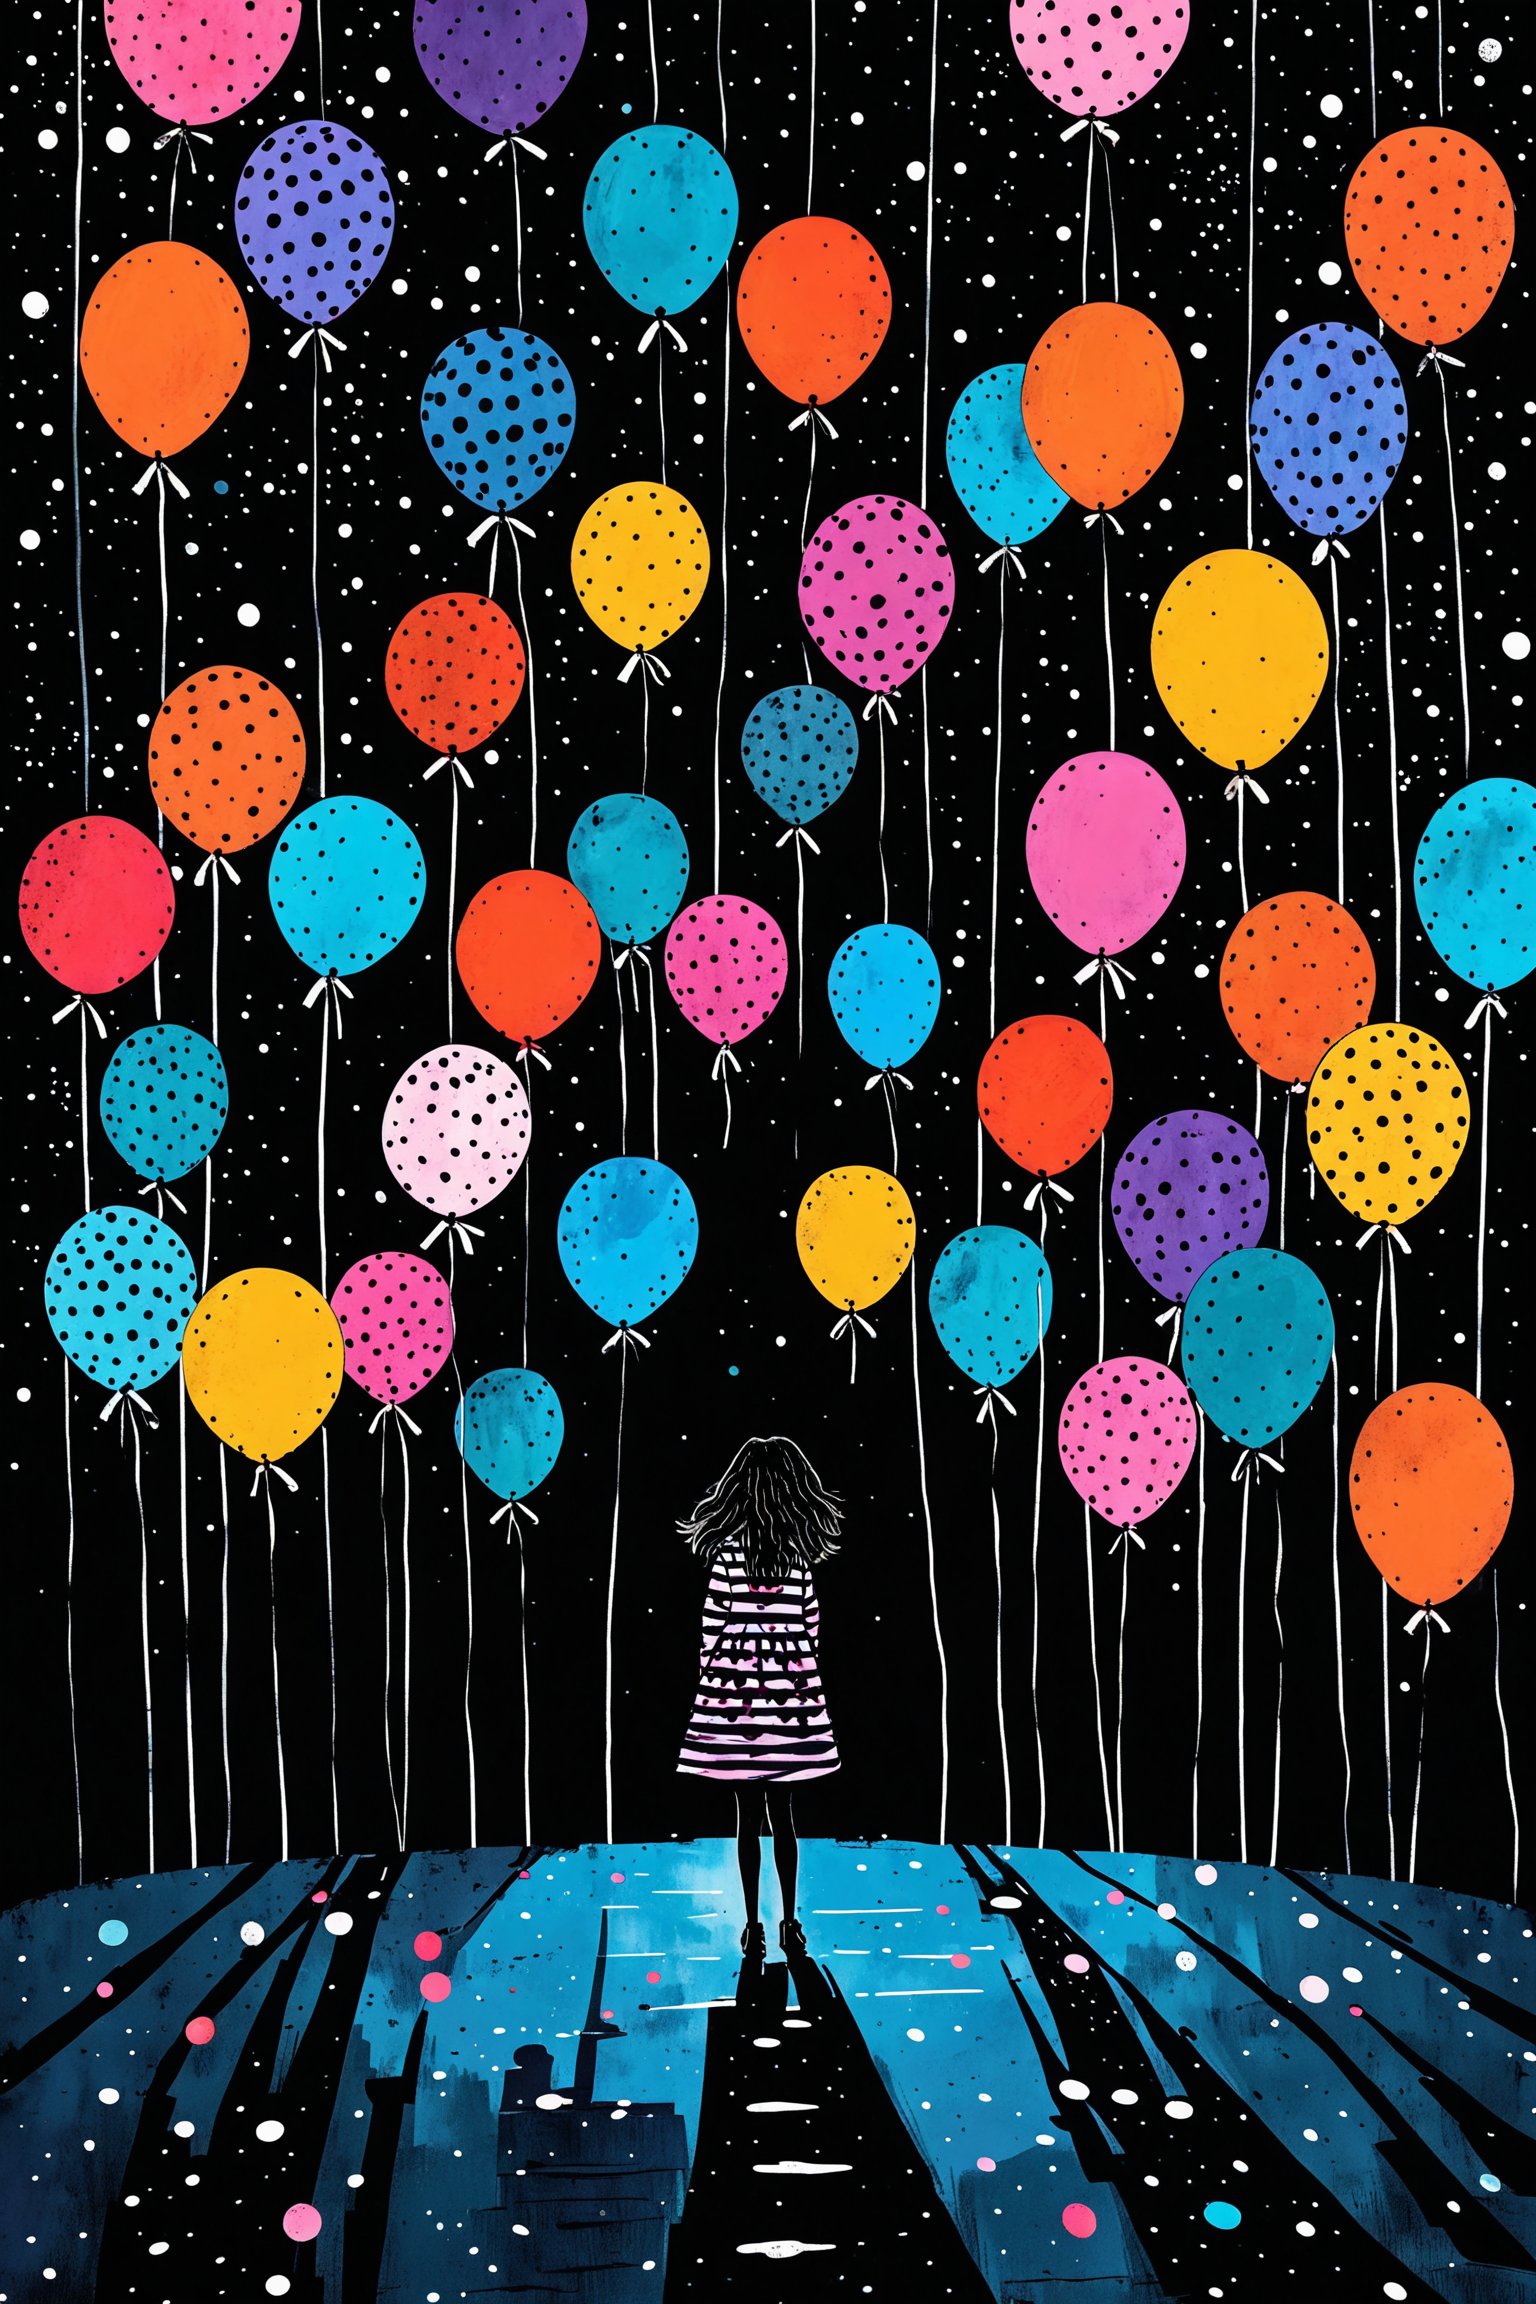 A night sky filled with vibrant, colorful balloons of various sizes and patterns. These balloons are suspended from strings and are scattered across the dark backdrop. Below the balloons, there's a silhouette of a person, possibly a girl, standing with her back to the viewer. She is wearing a striped dress and appears to be looking up at the balloons. The ground is depicted as a reflective surface, mirroring the balloons and the person. The overall atmosphere of the image is whimsical and dreamy, with a touch of solitude.